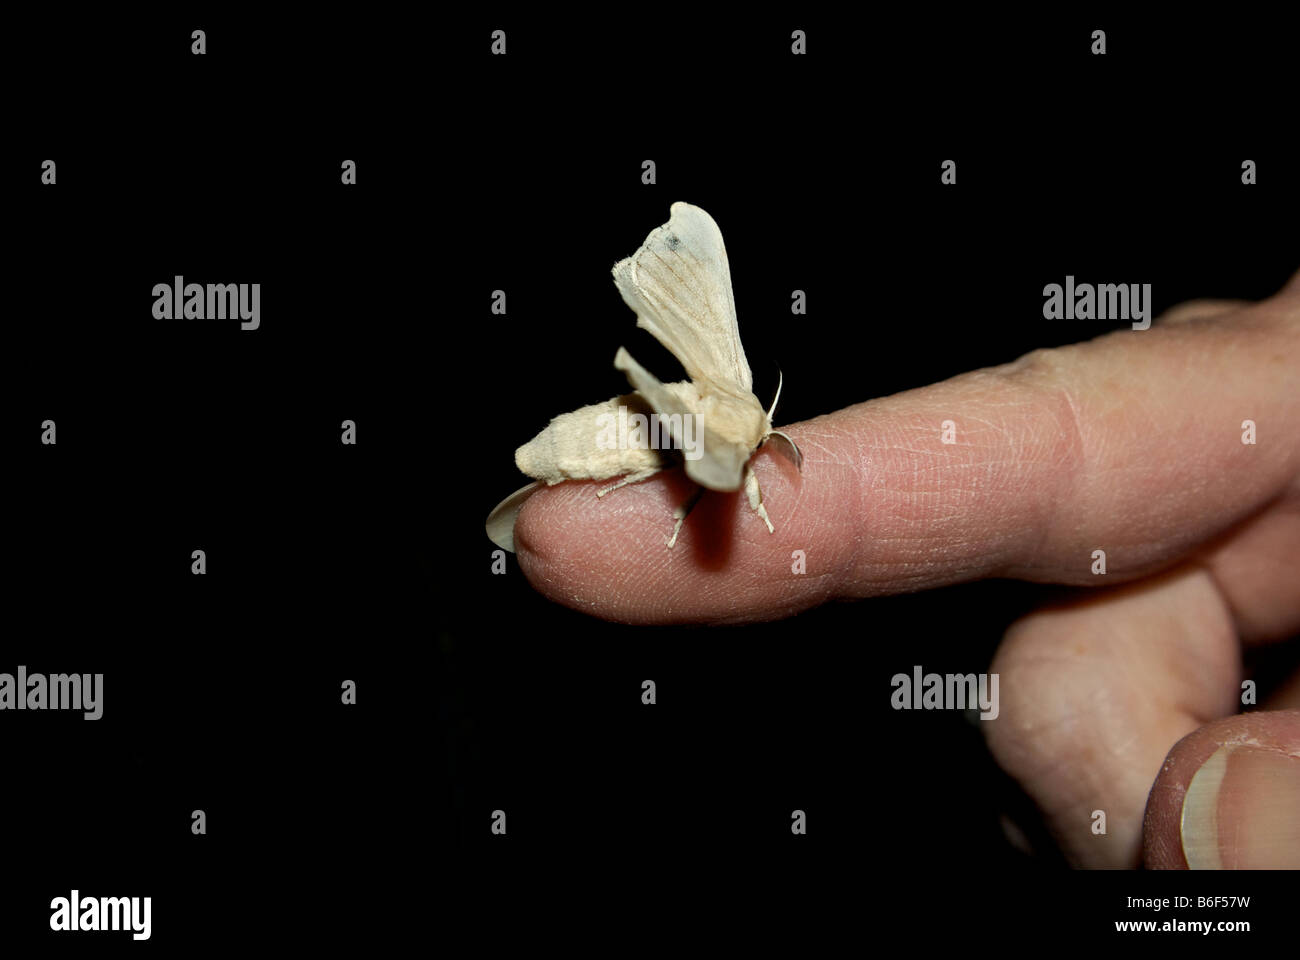 Soft downy haired delicate domesticated non flying adult silkworm moth insect on fingertip Stock Photo